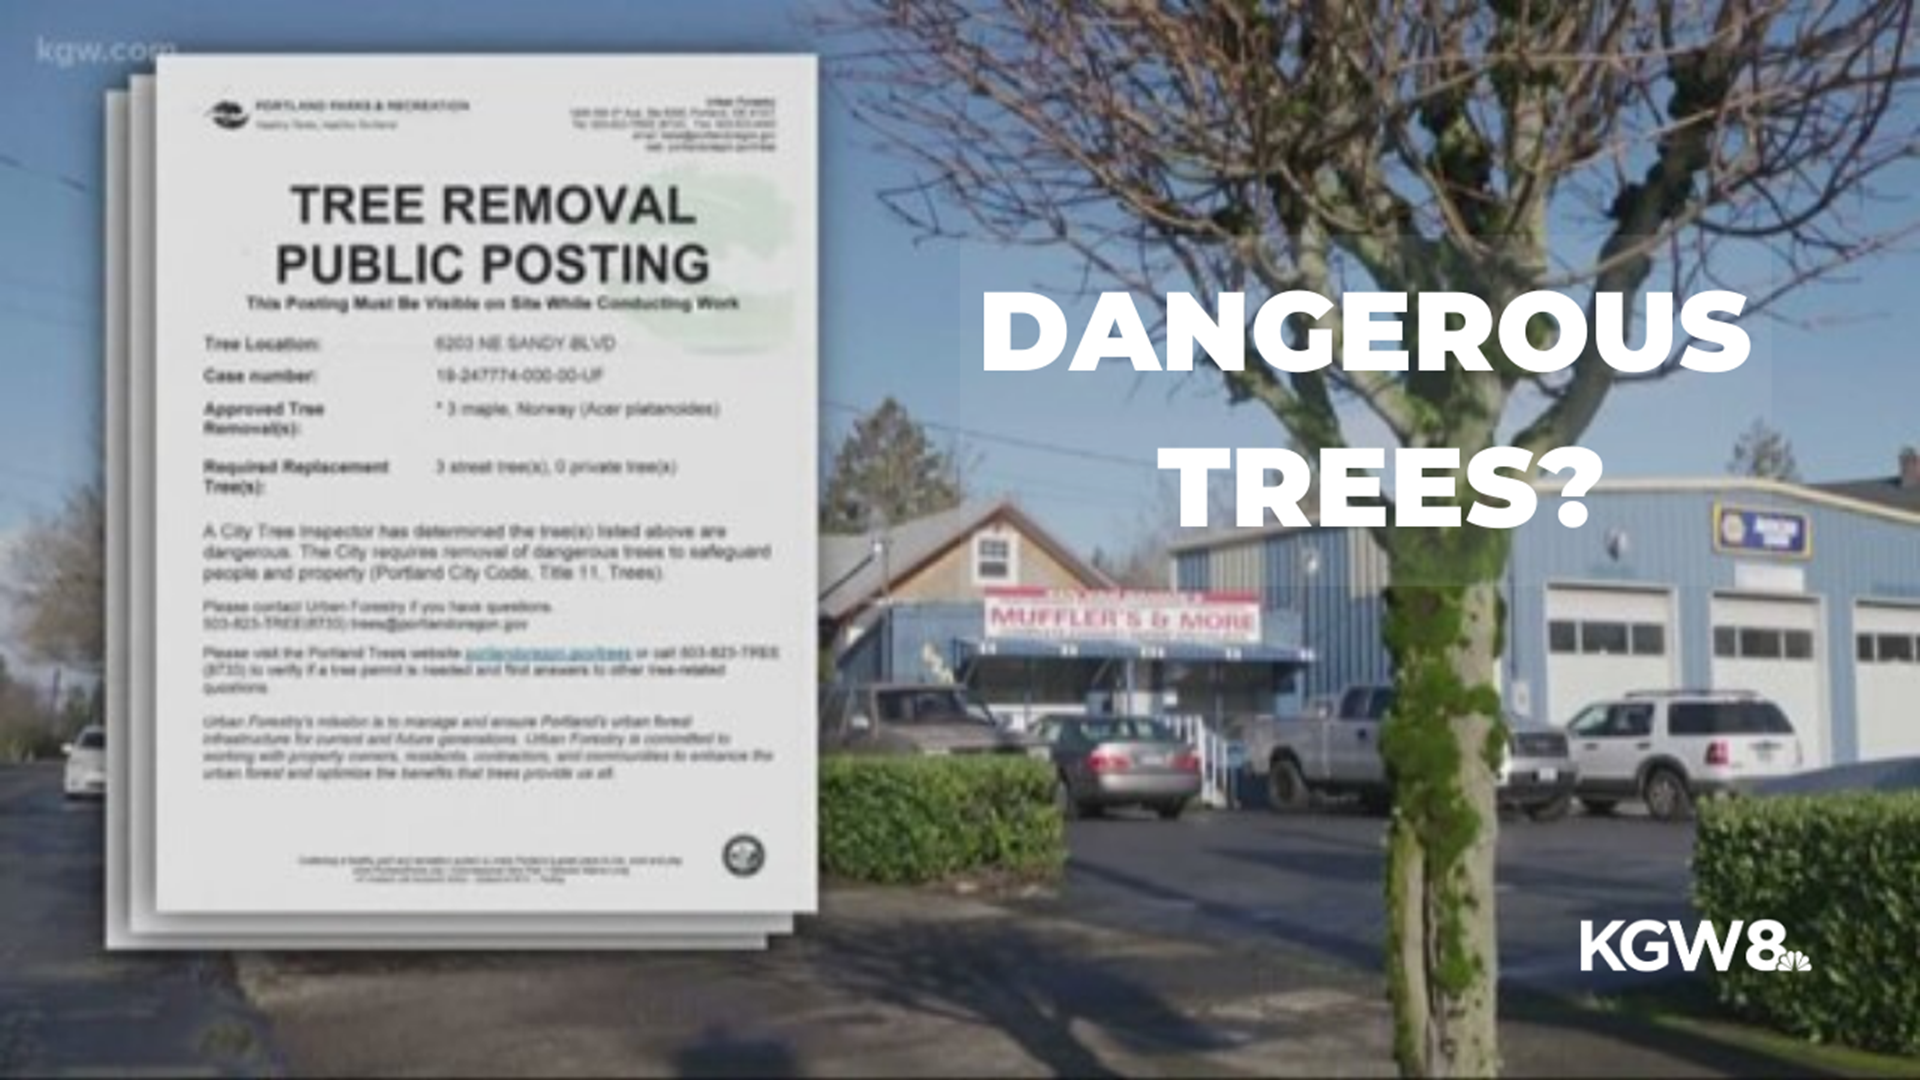 The city is demanding Ken Van Damme’s Automotive shop in Northeast Portland pay a fine, cut down trees, grind out the stumps and plant new trees.